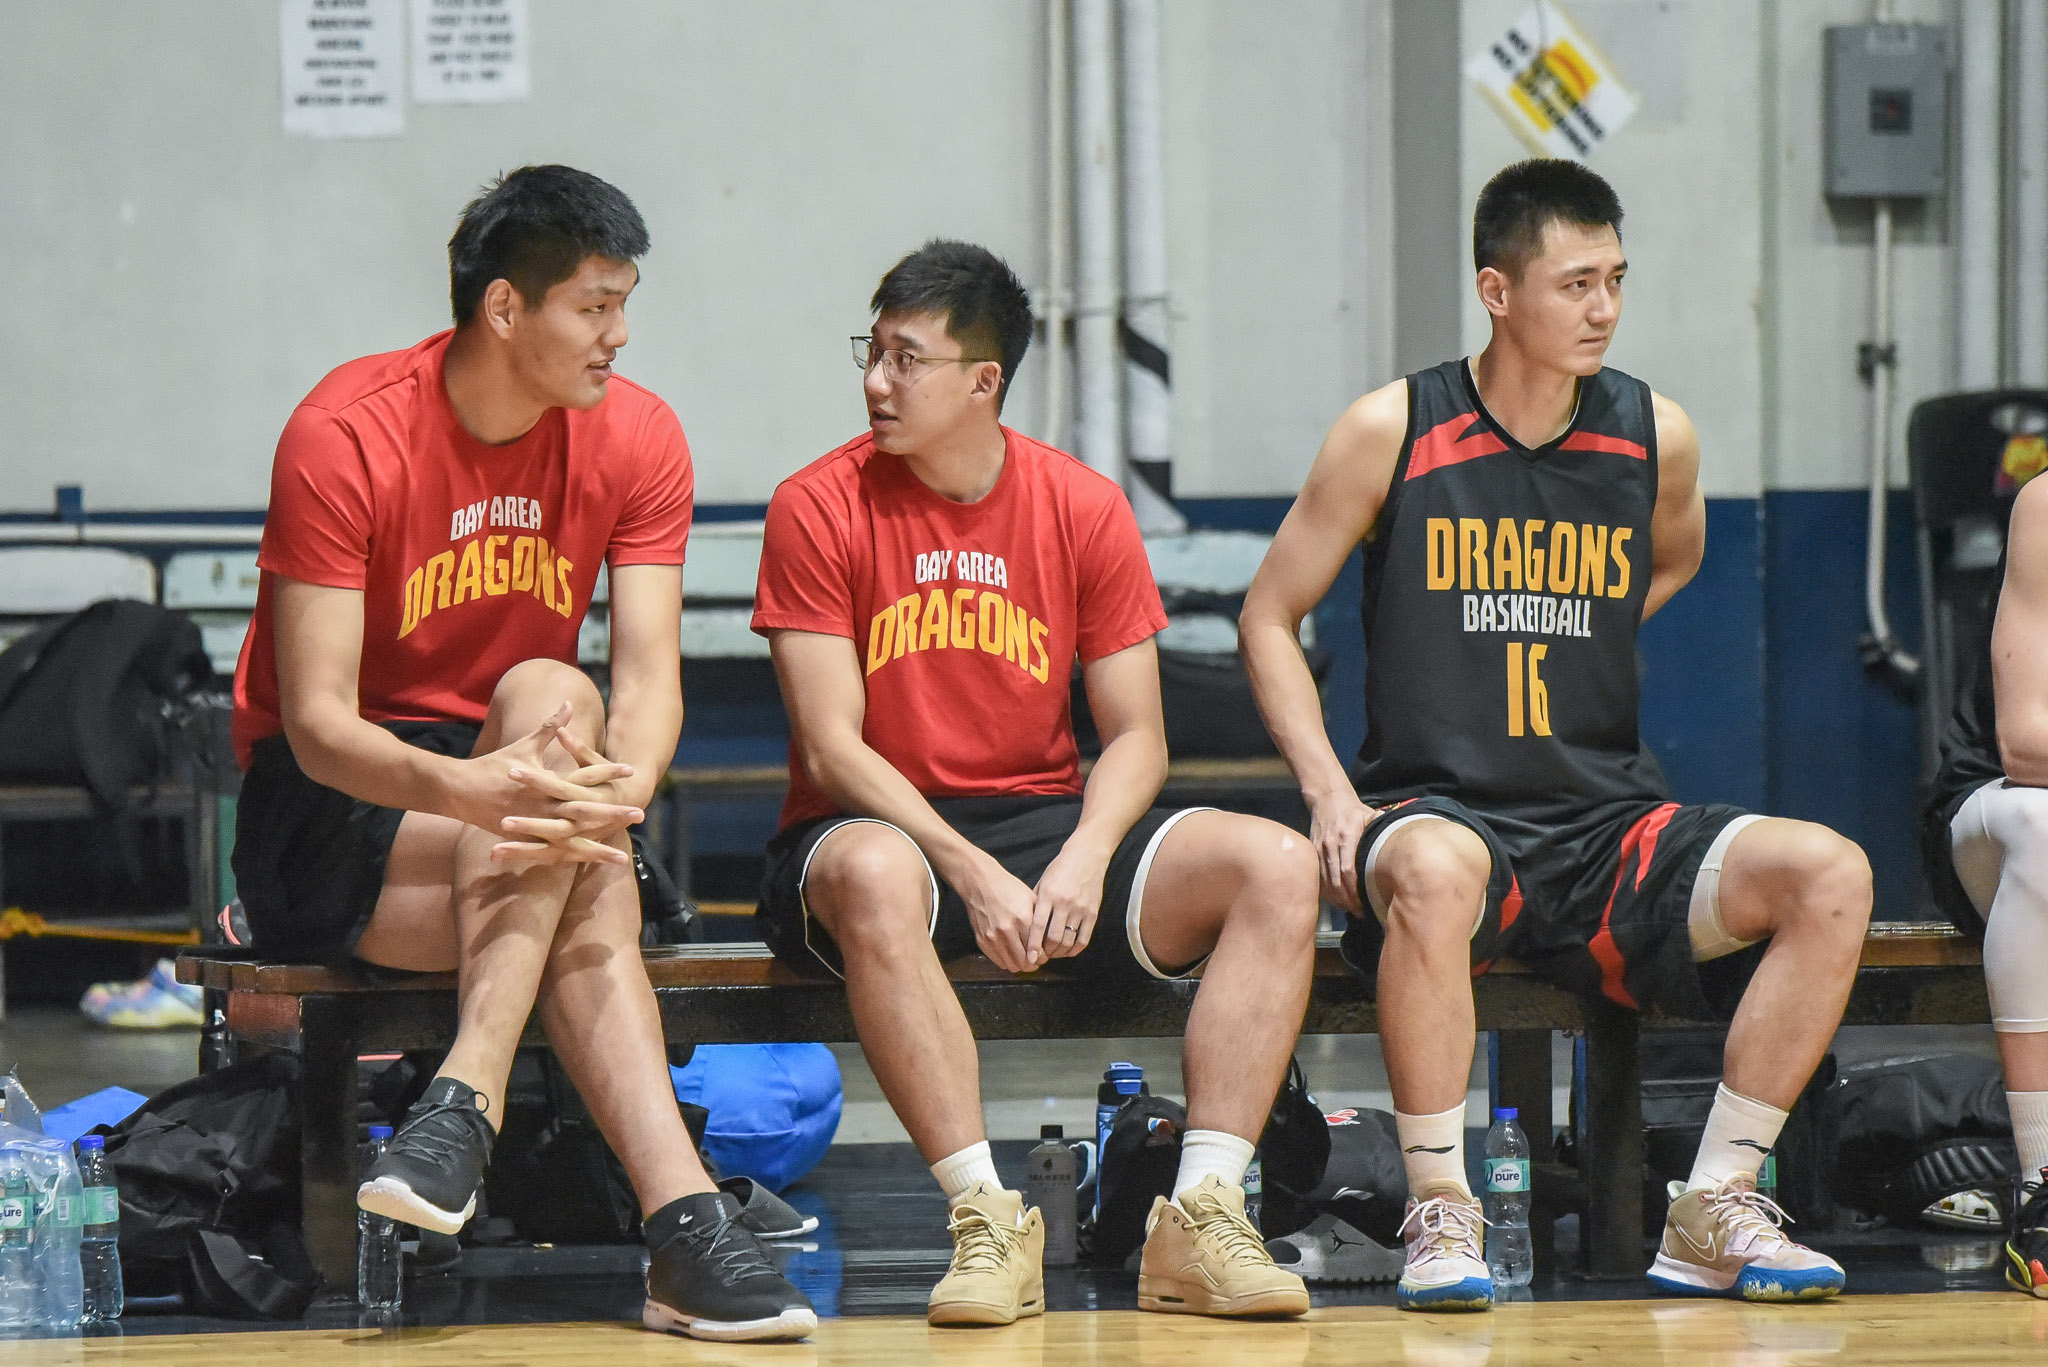 Ateneo-vs-Bay-Area-Dragons-bench Goorjian believes Bay Area learned alot after Ateneo tuneup ADMU Basketball EASL News PBA  - philippine sports news